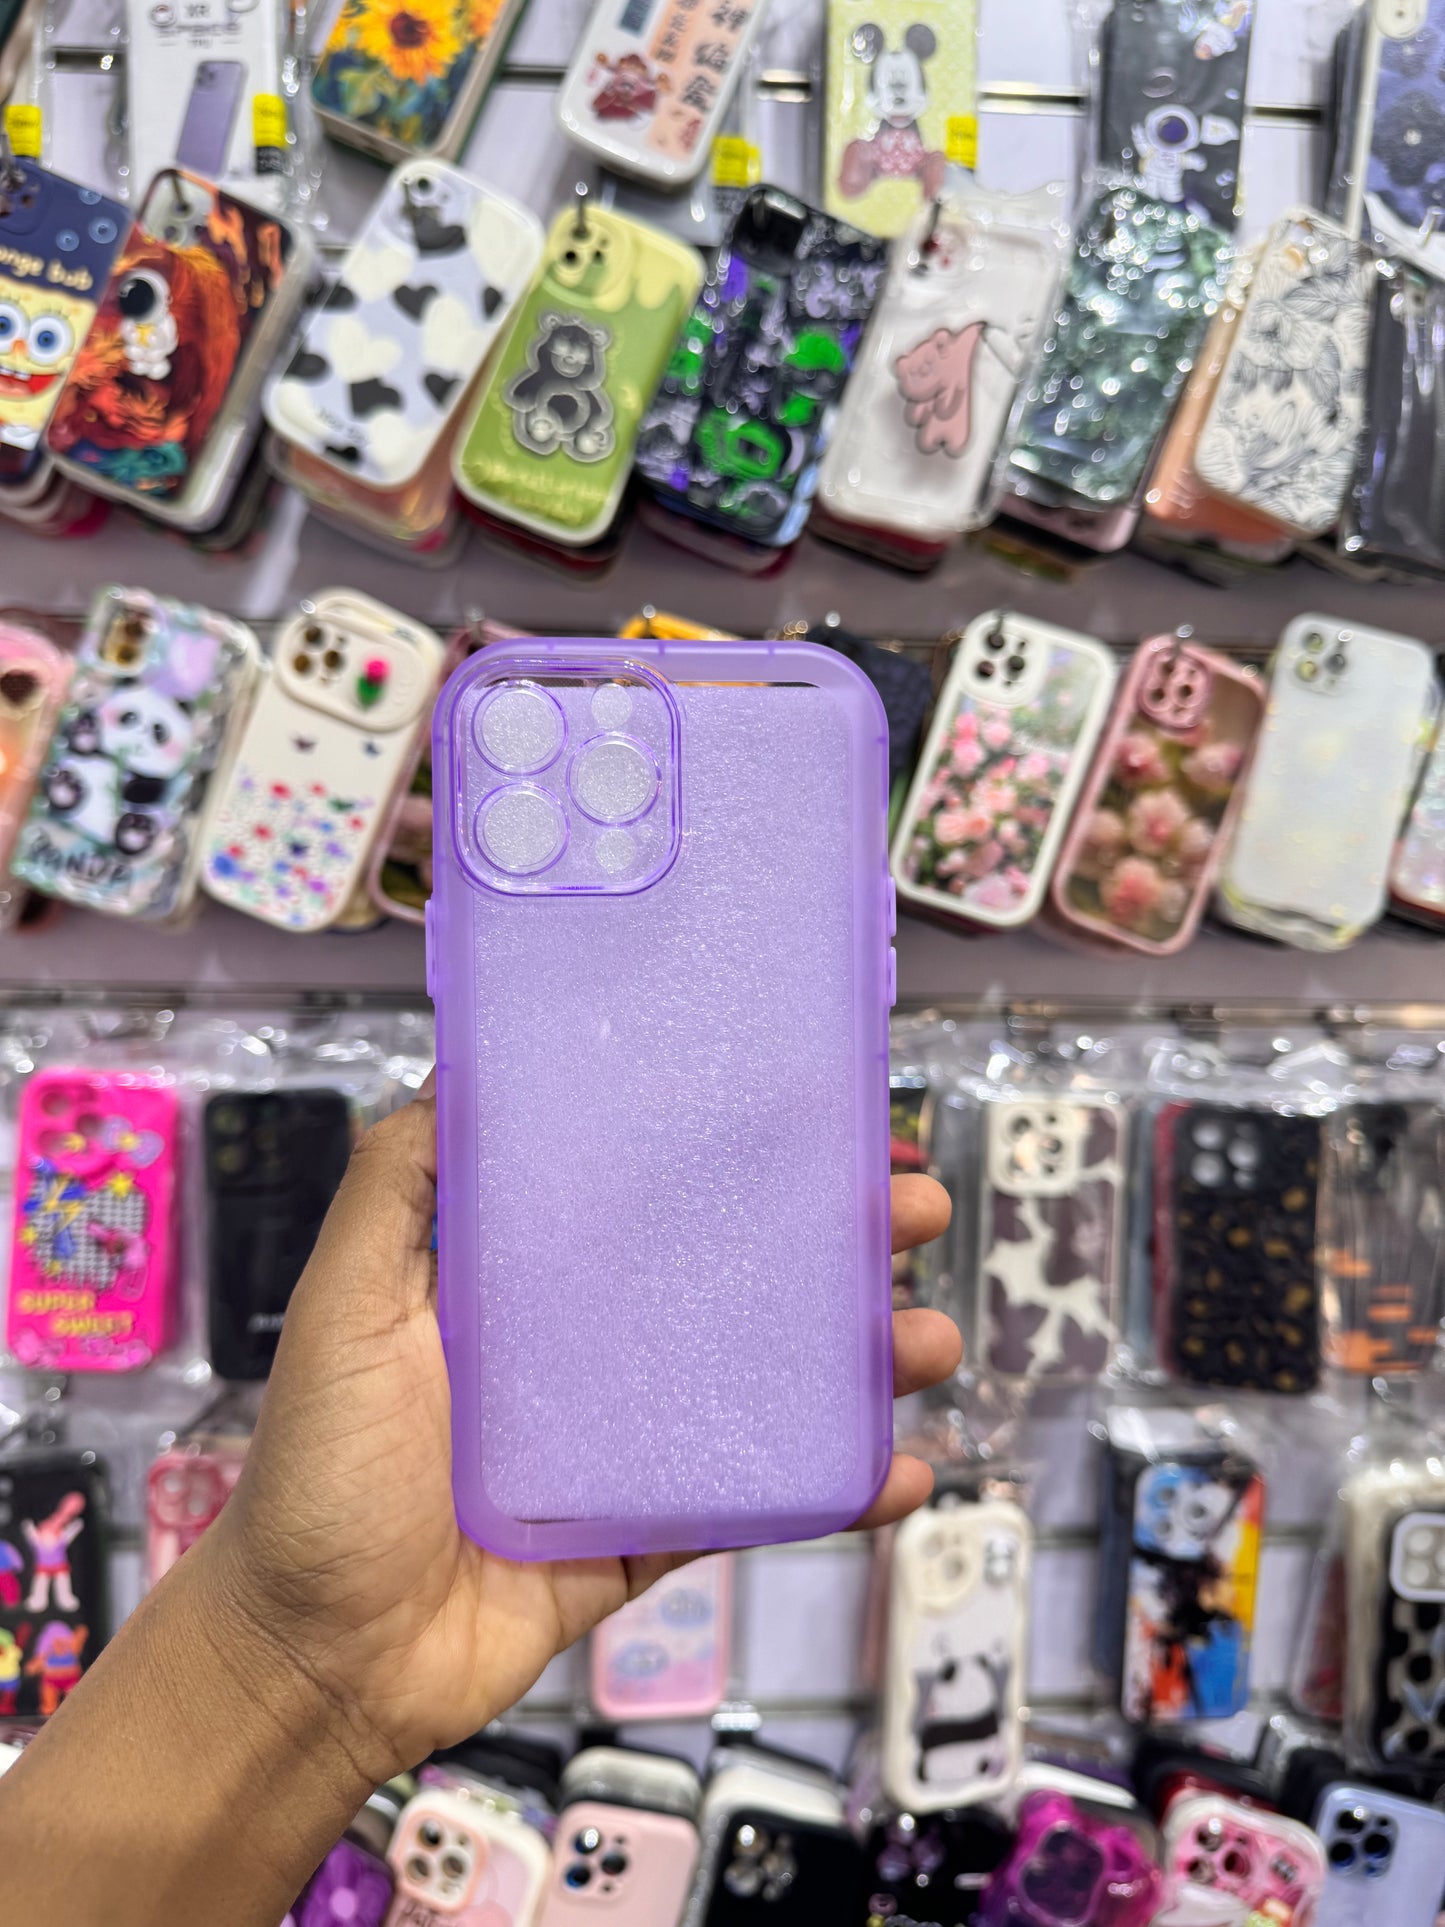 Transperent Camera protection Purple Case For IPhones